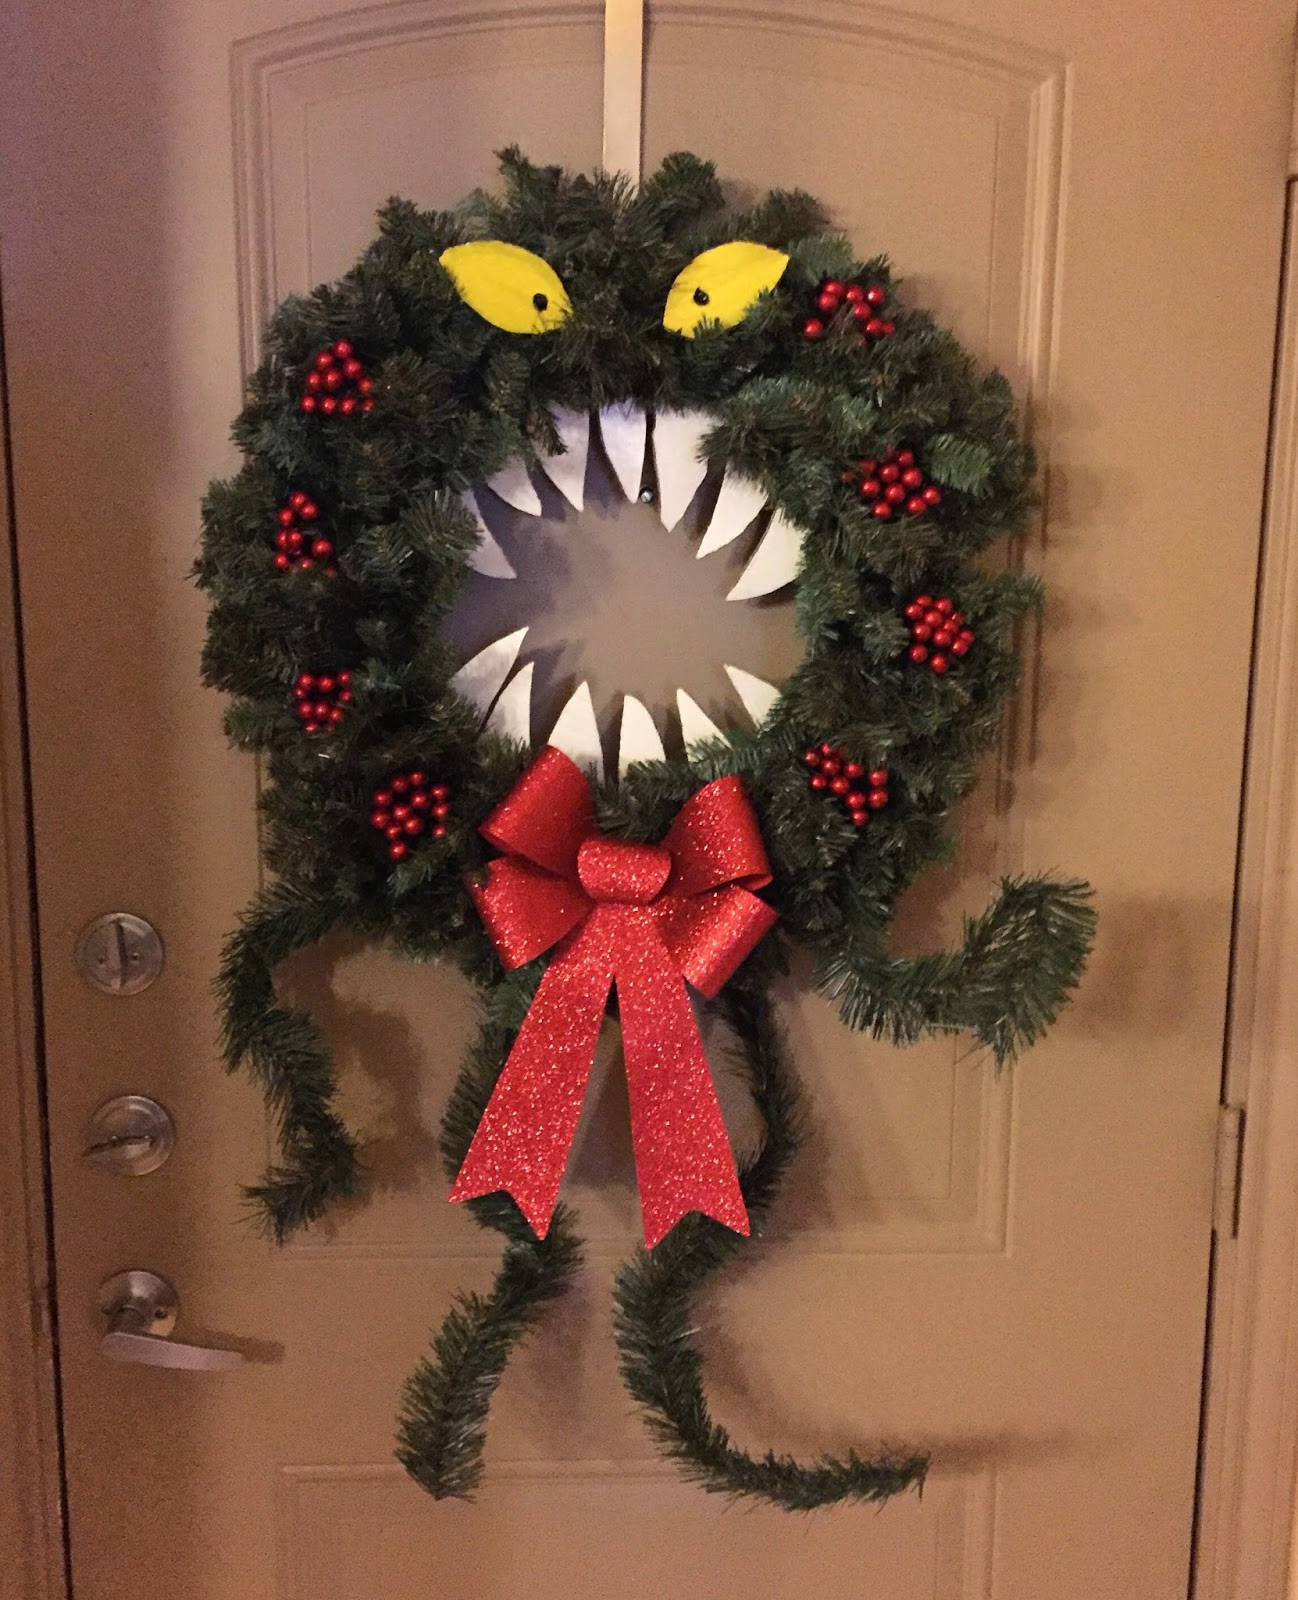 DIY Nightmare Before Christmas Decorations
 Halloween Wreath DIY Ideas That are Beyond Easy to Do